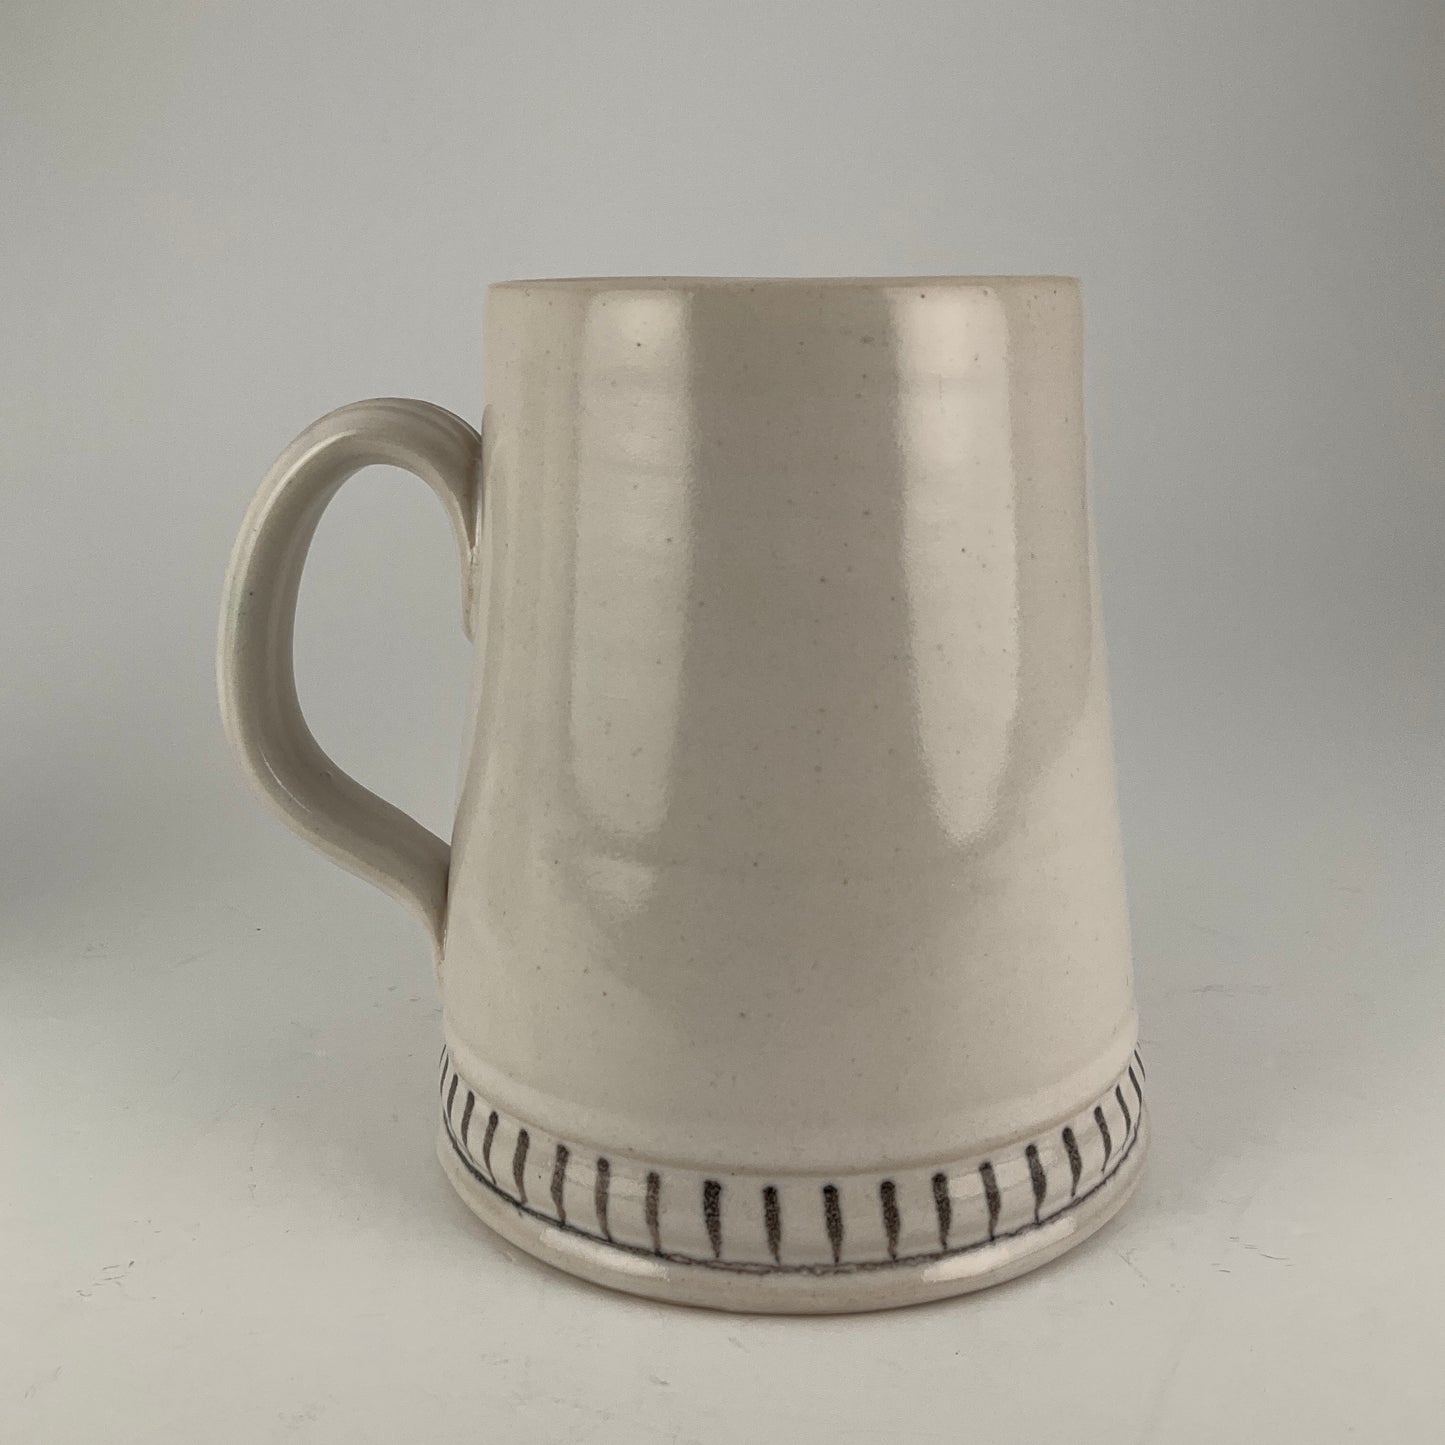 Buchan - Tankards and Plate